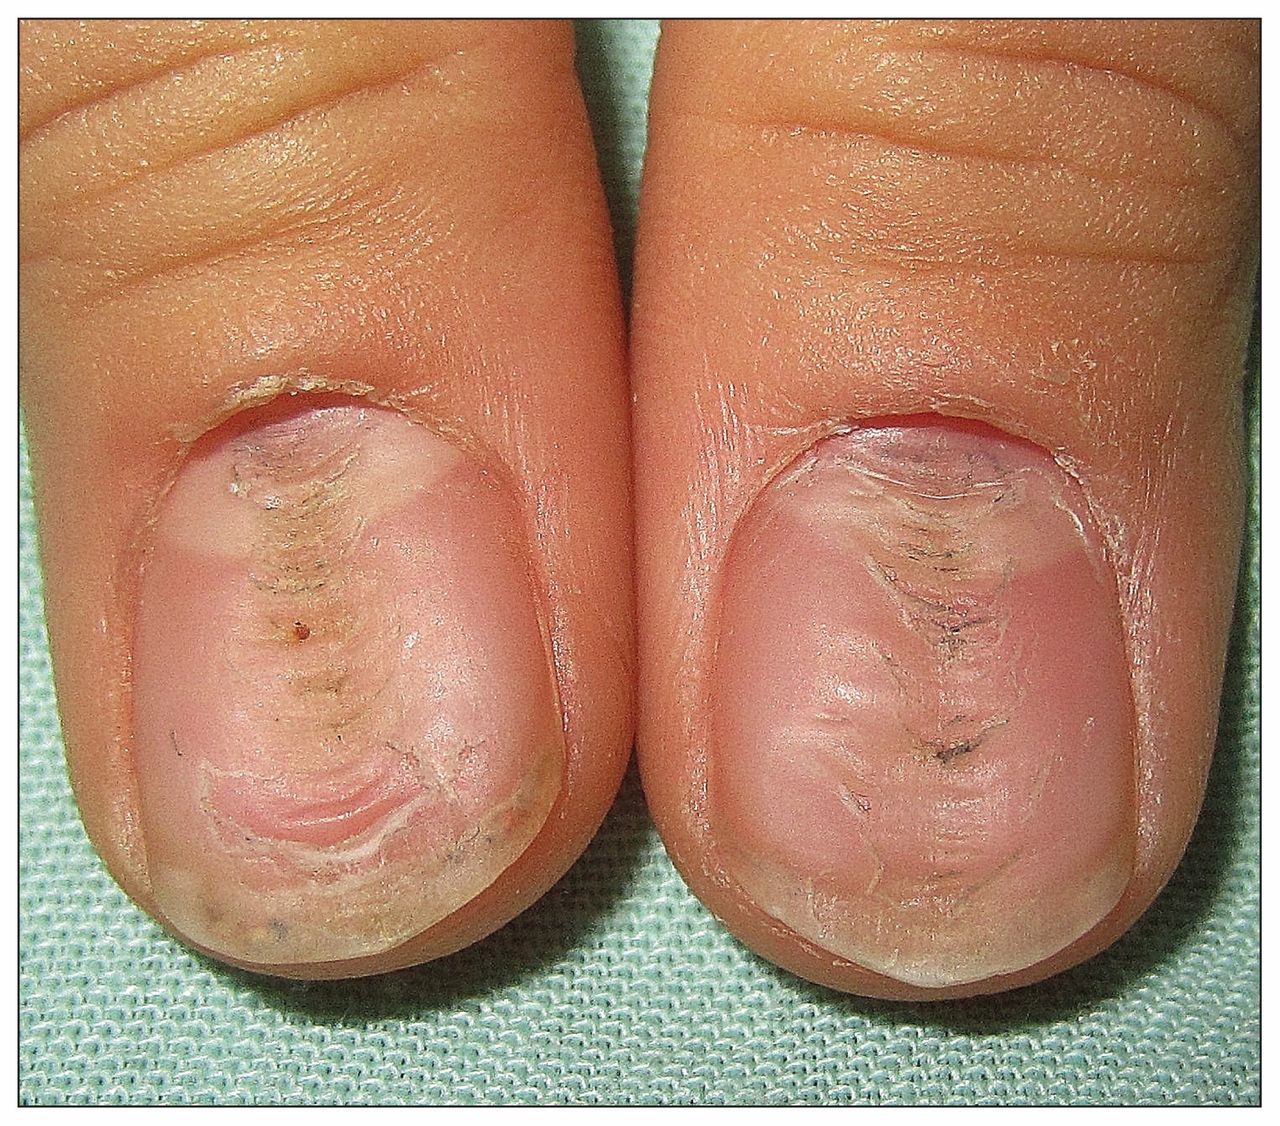 What caused these distal nail changes? | Consultant360